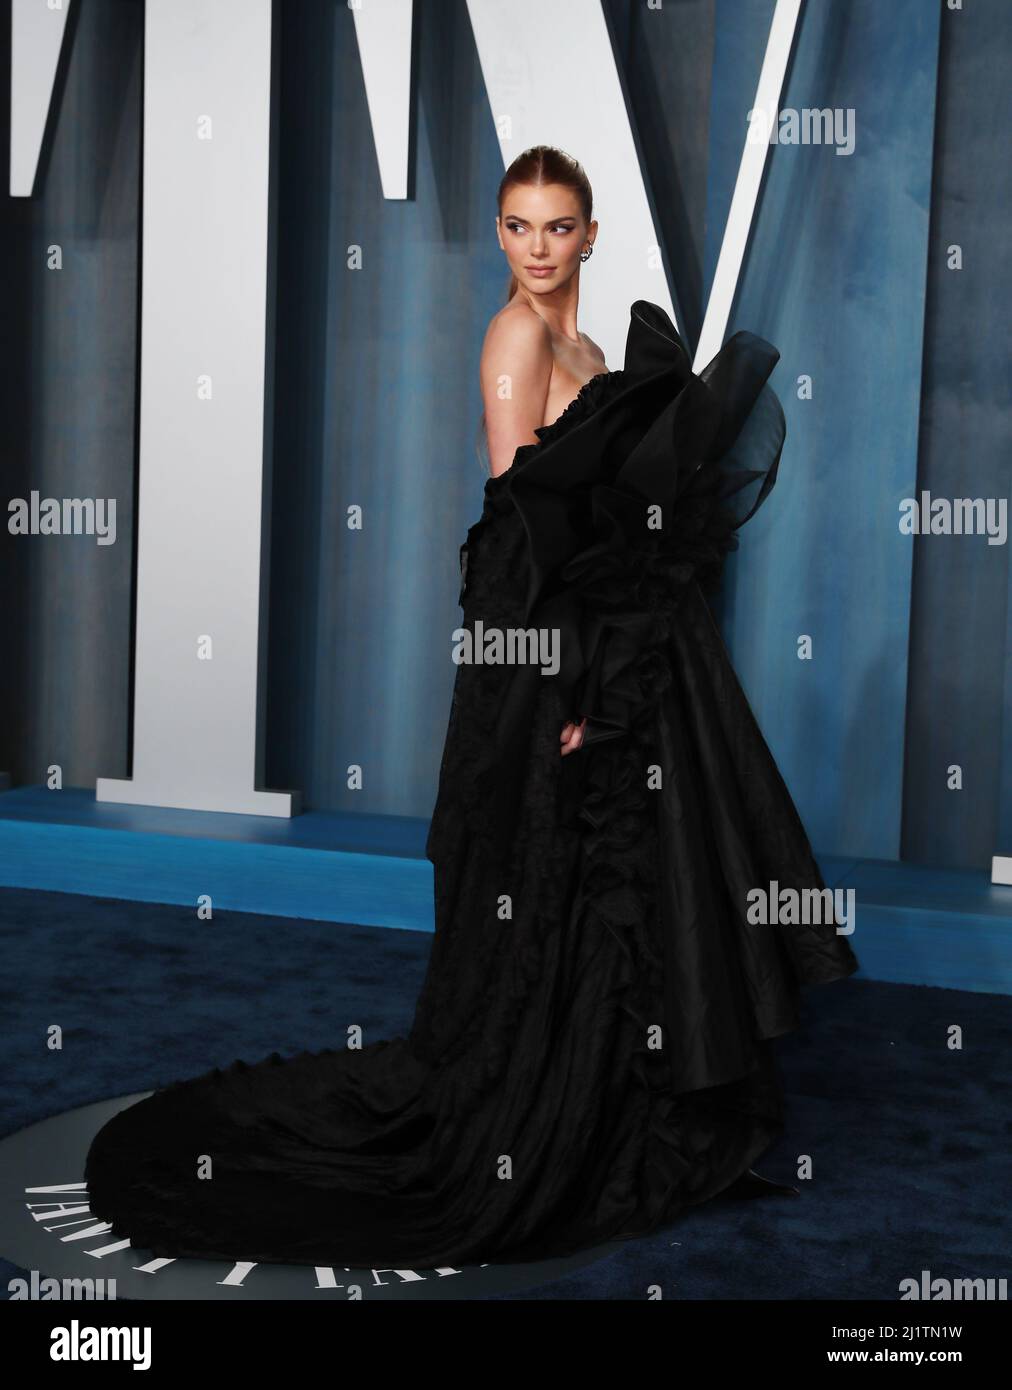 Kendall Jenner arrives at the Vanity Fair Oscar party during the 94th Academy Awards in Beverly Hills, California, U.S., March 27, 2022. REUTERS/Danny Moloshok Stock Photo